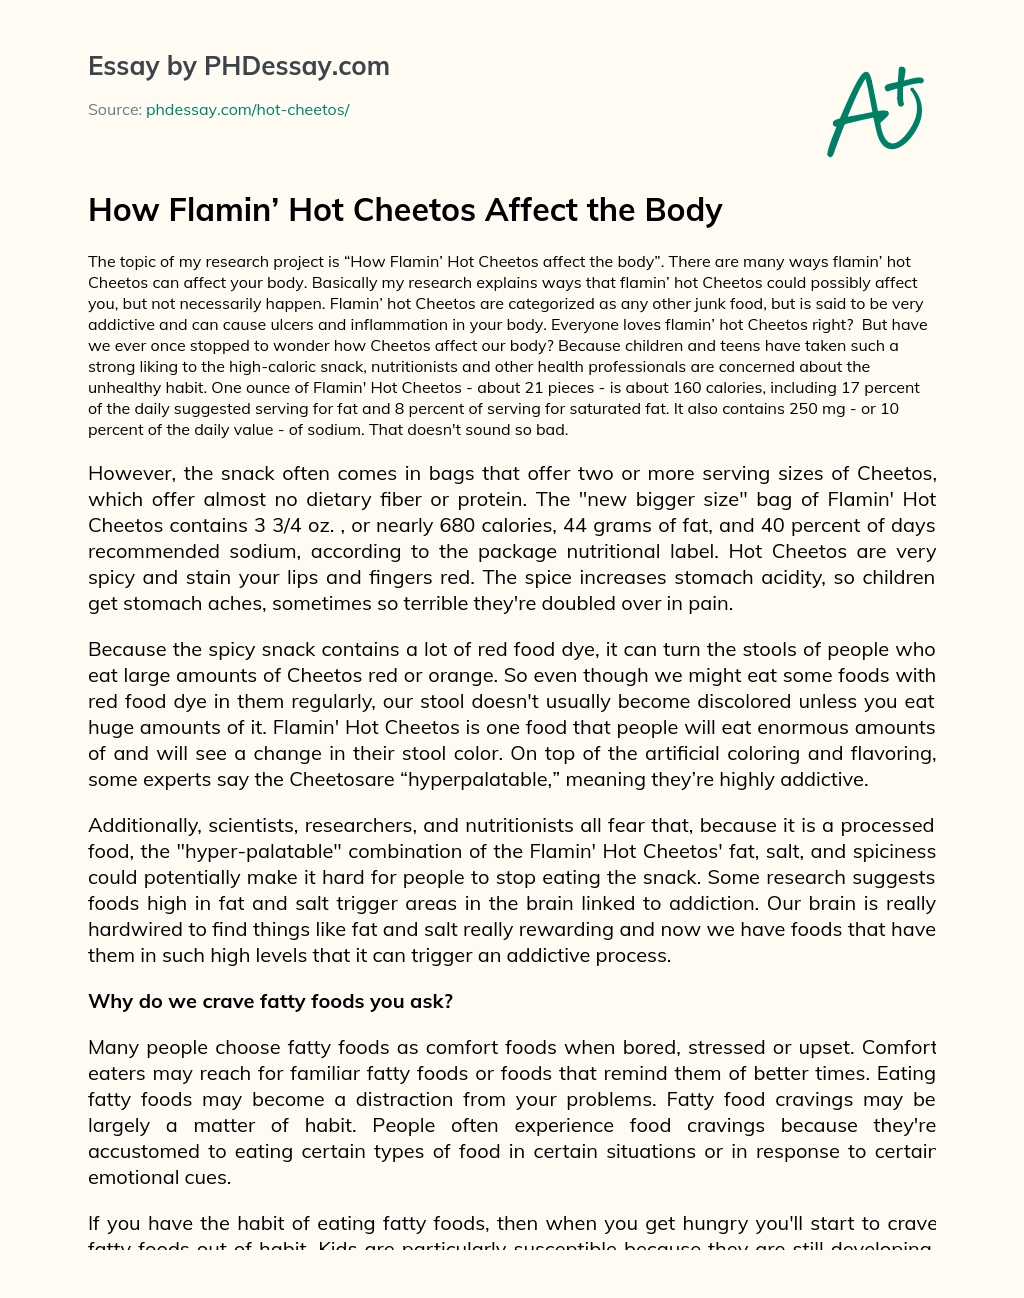 How Flamin’ Hot Cheetos Affect the Body essay